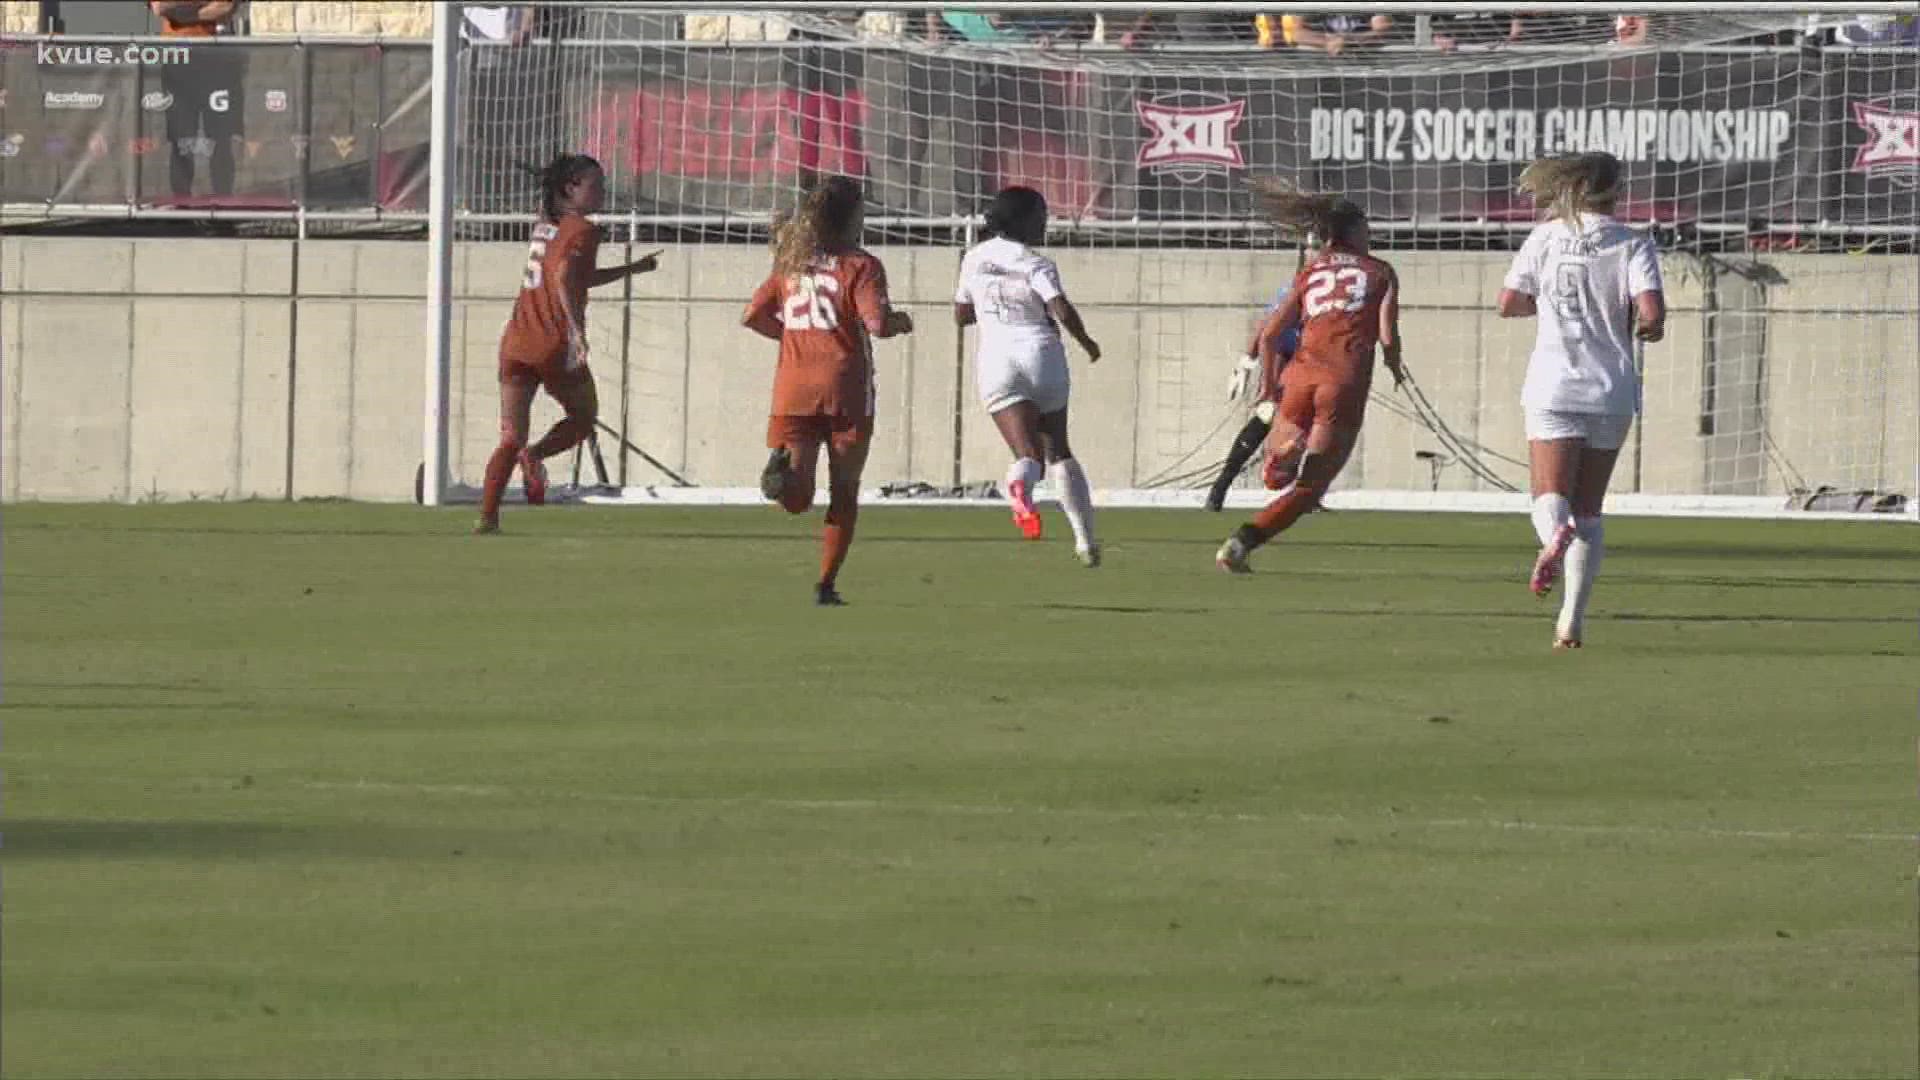 The Texas Longhorns soccer team fell 2-1 to the TCU Horned Frogs in the Big 12 Championship final match.